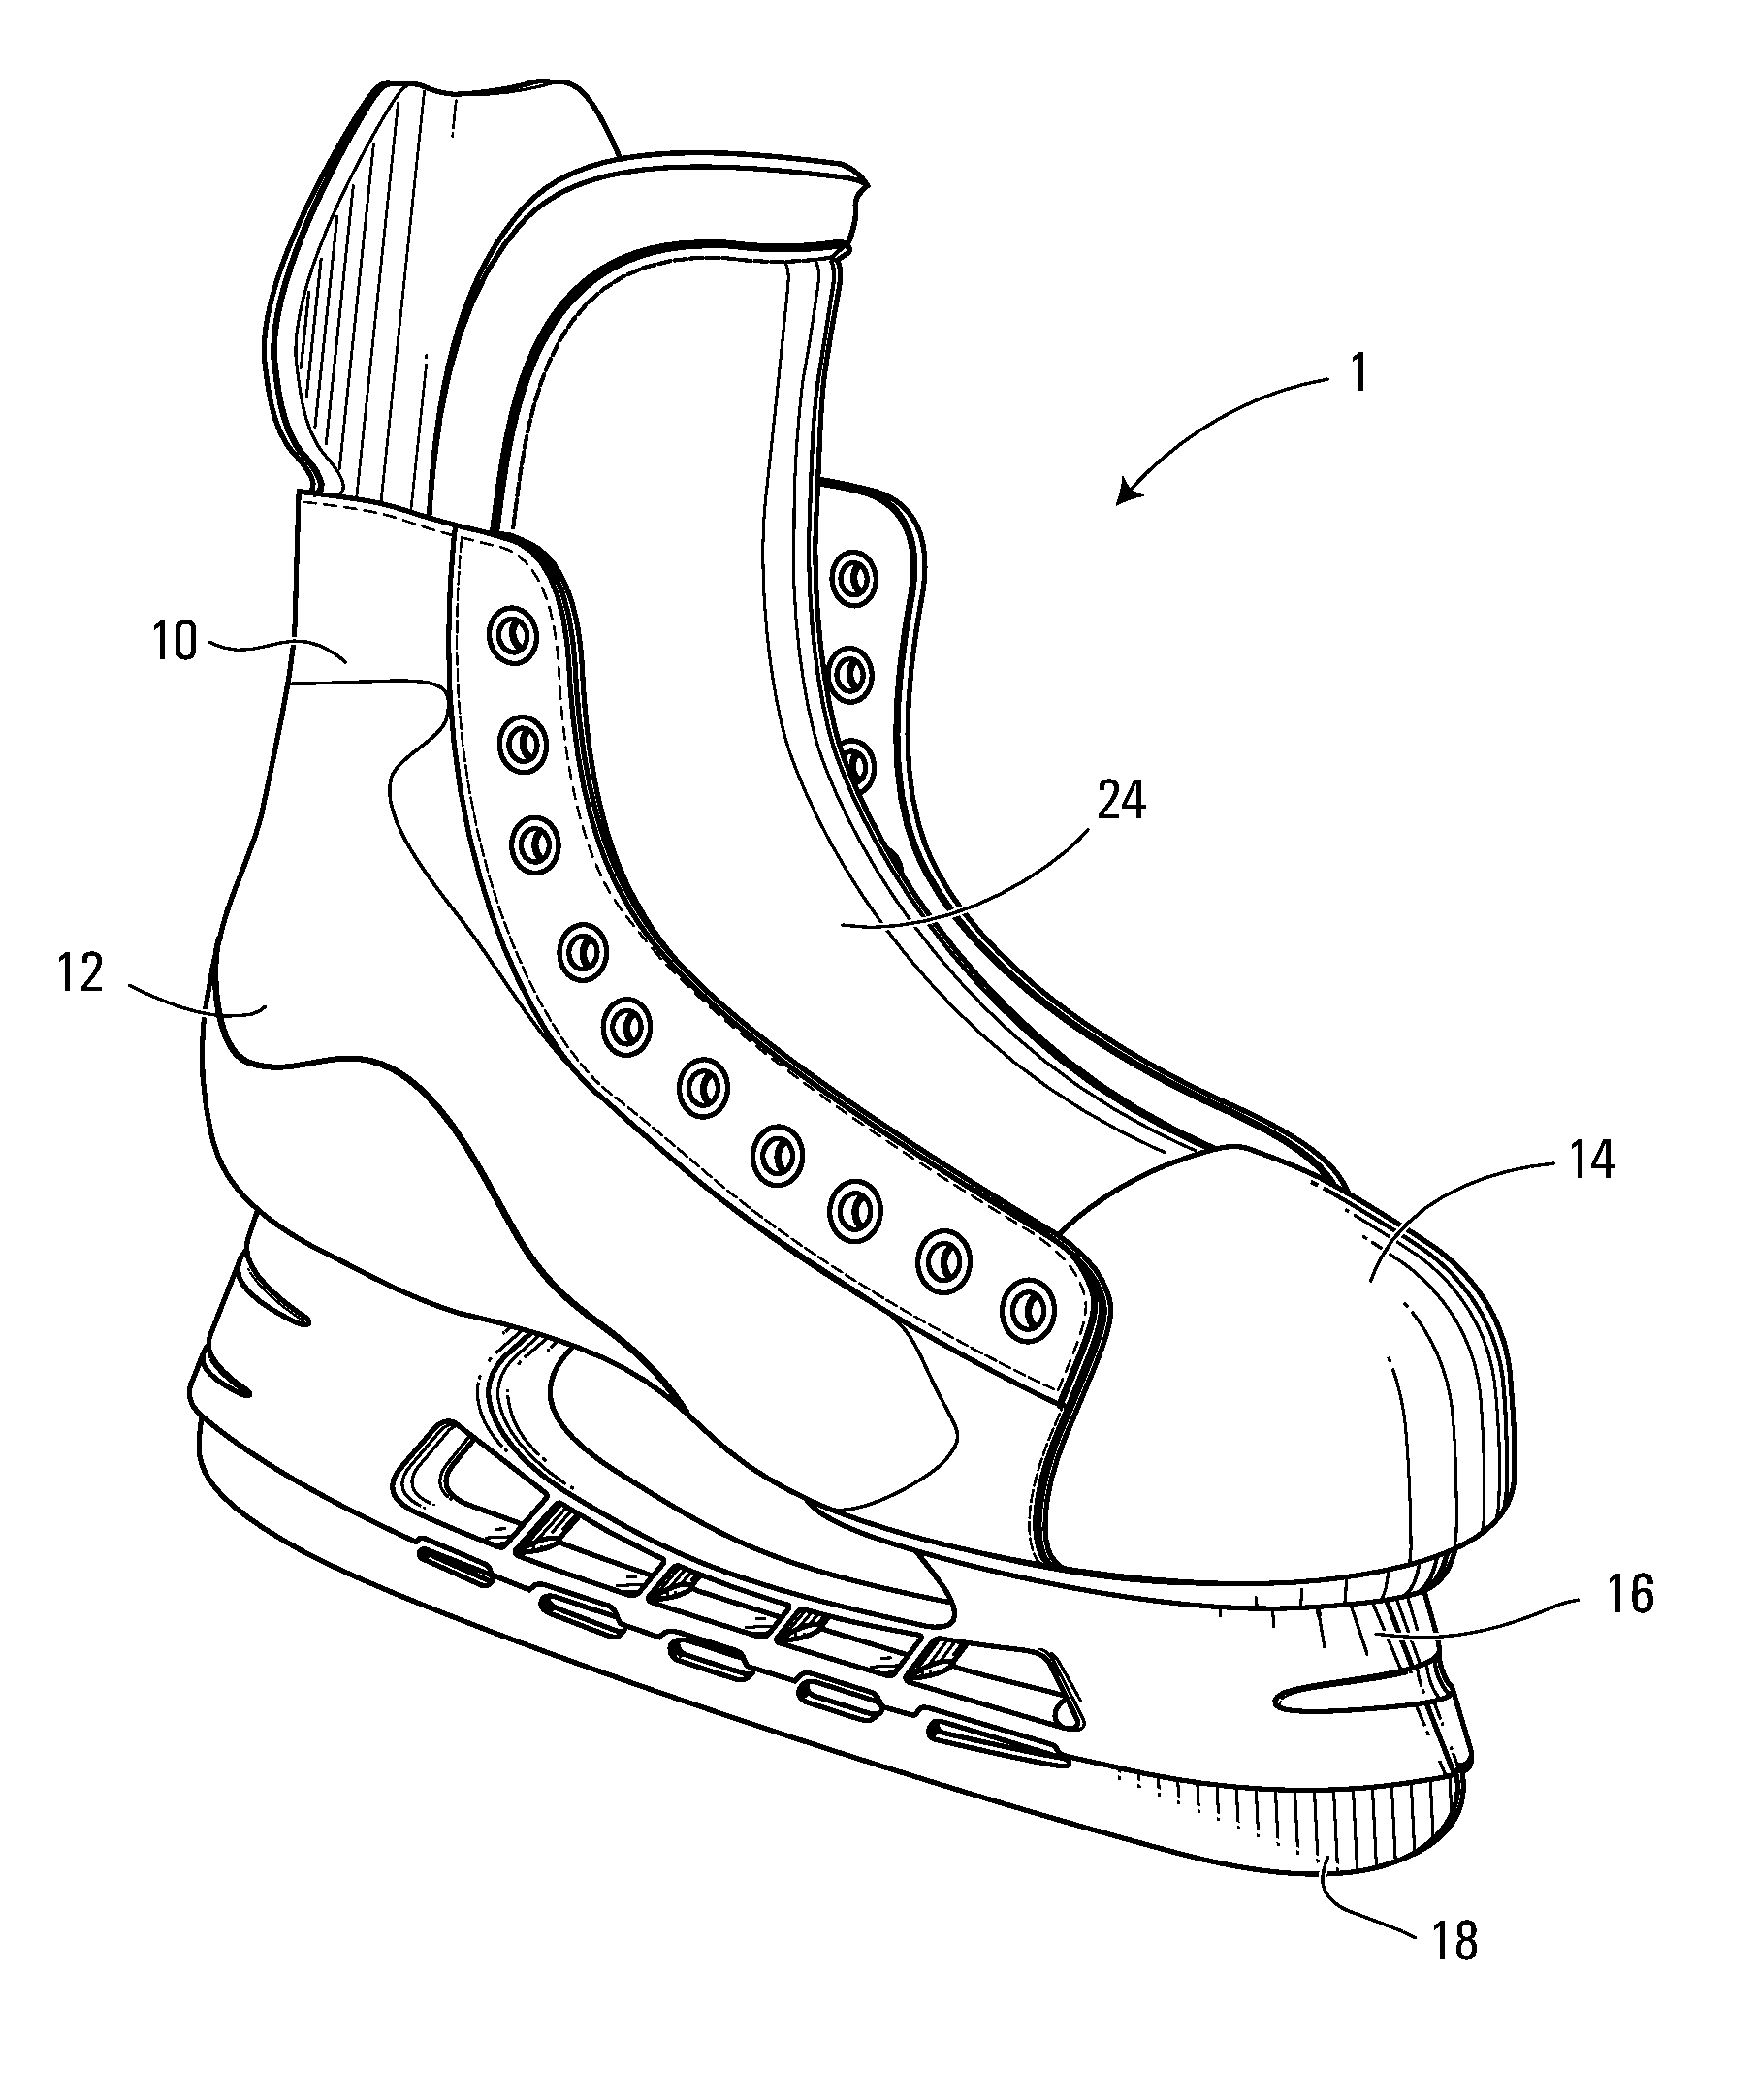 Method of making a lasted skate boot